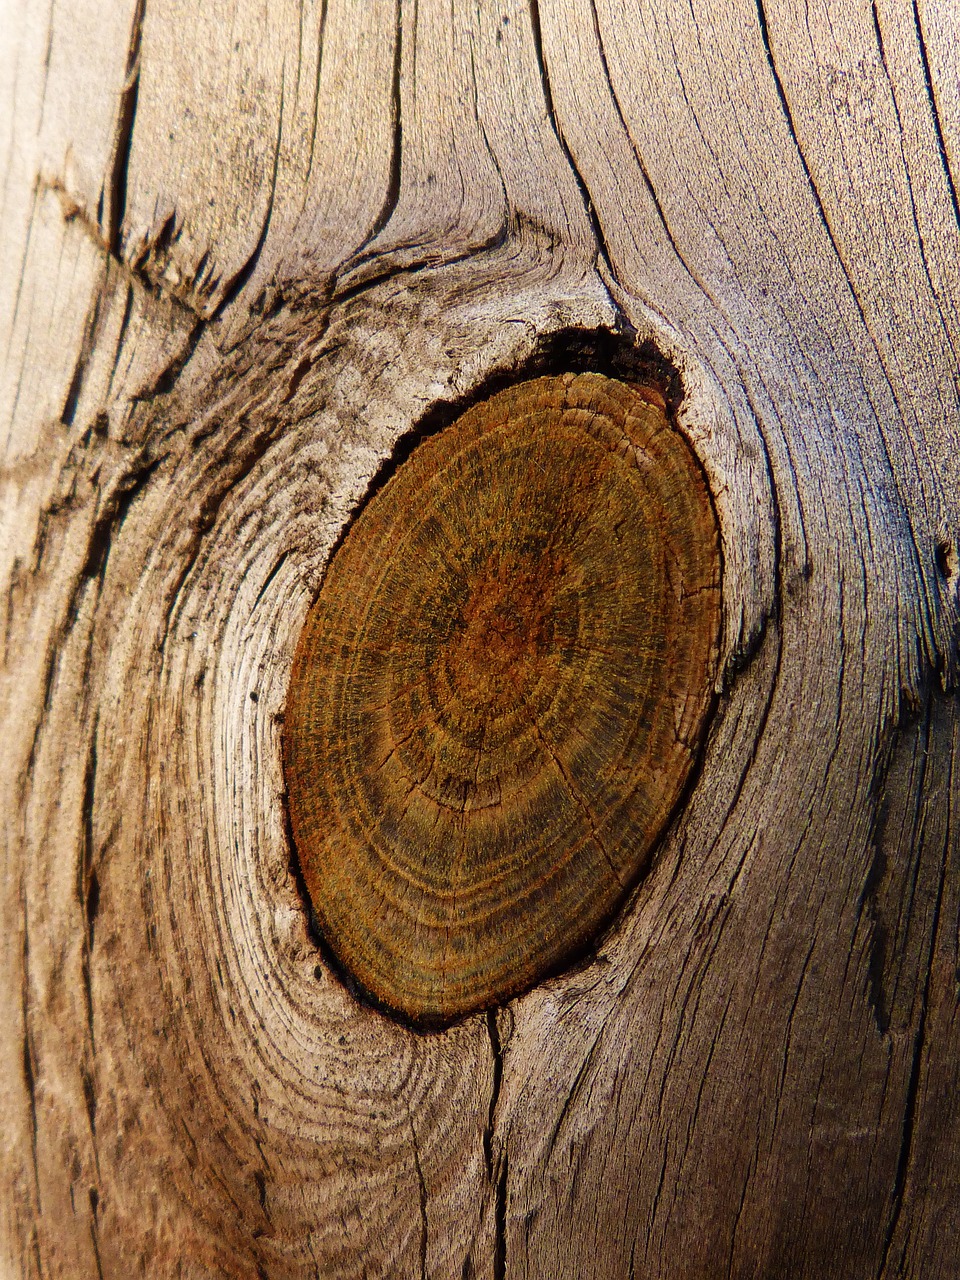 wood knot trunk free photo